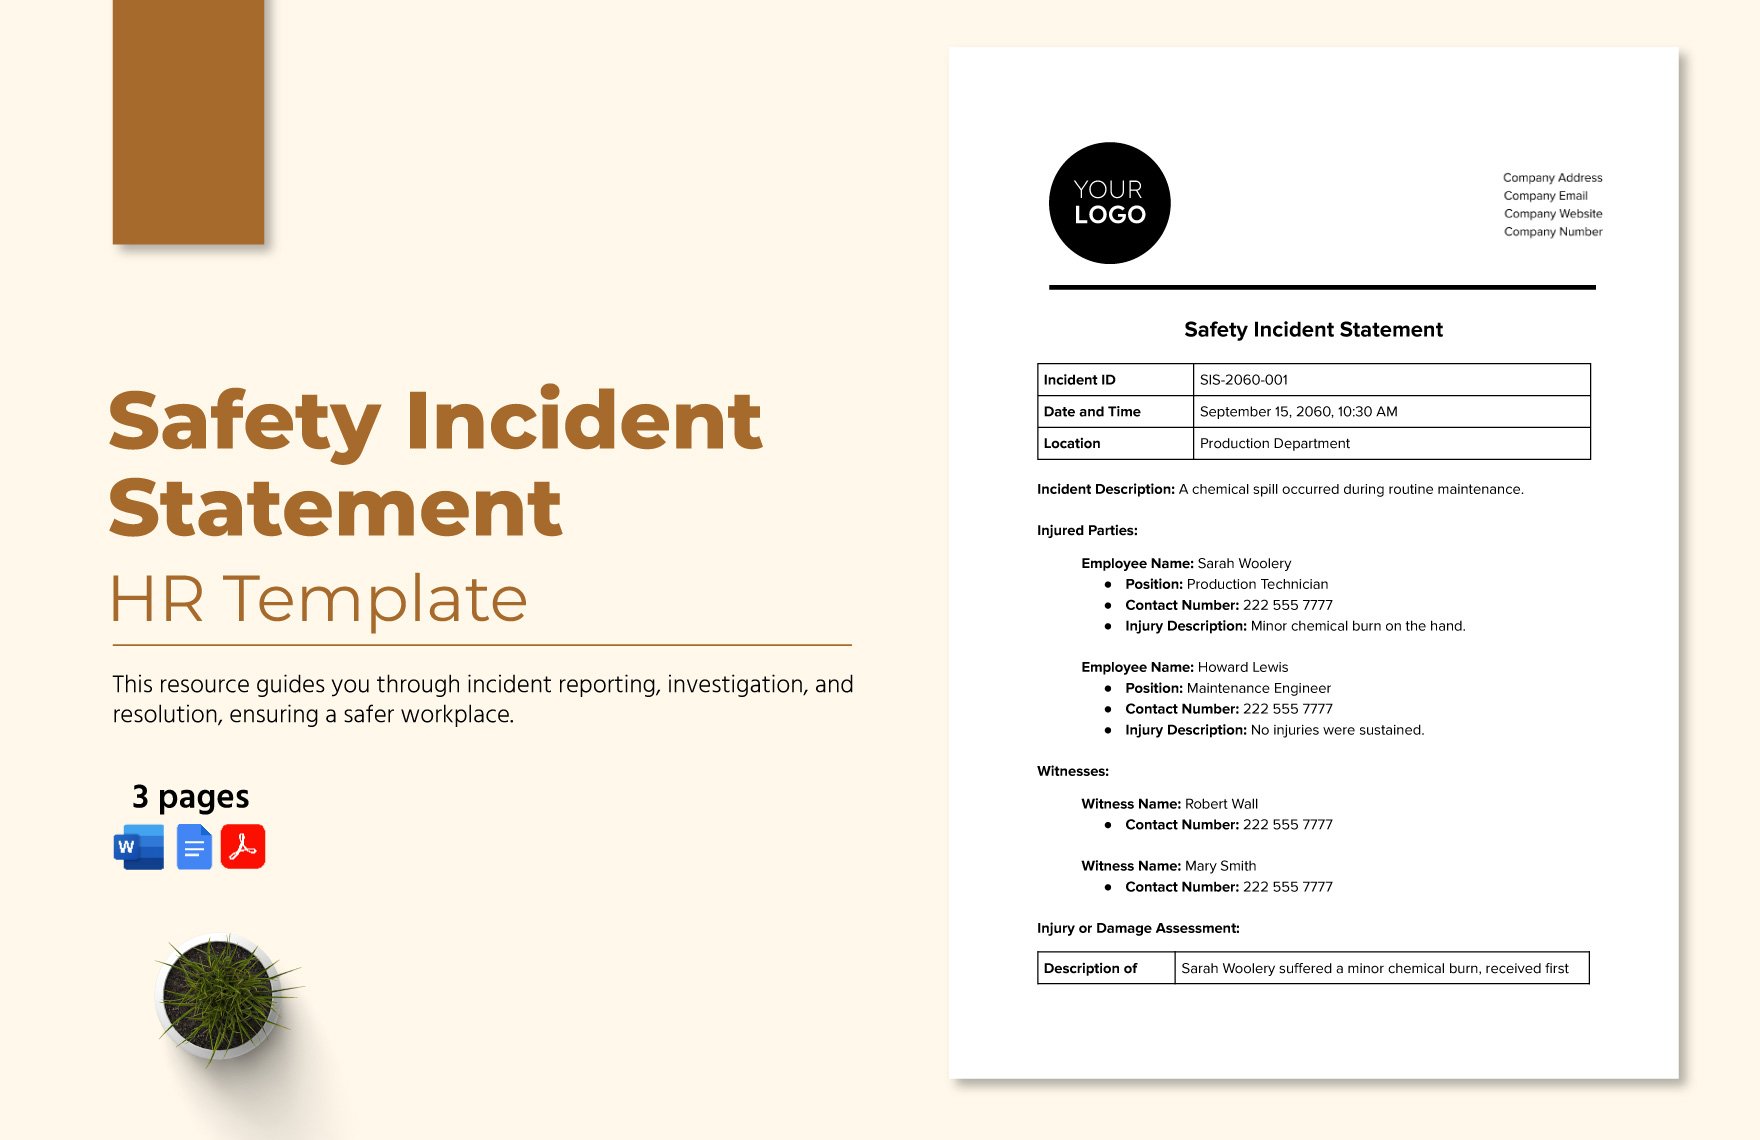 Safety Incident Statement HR Template